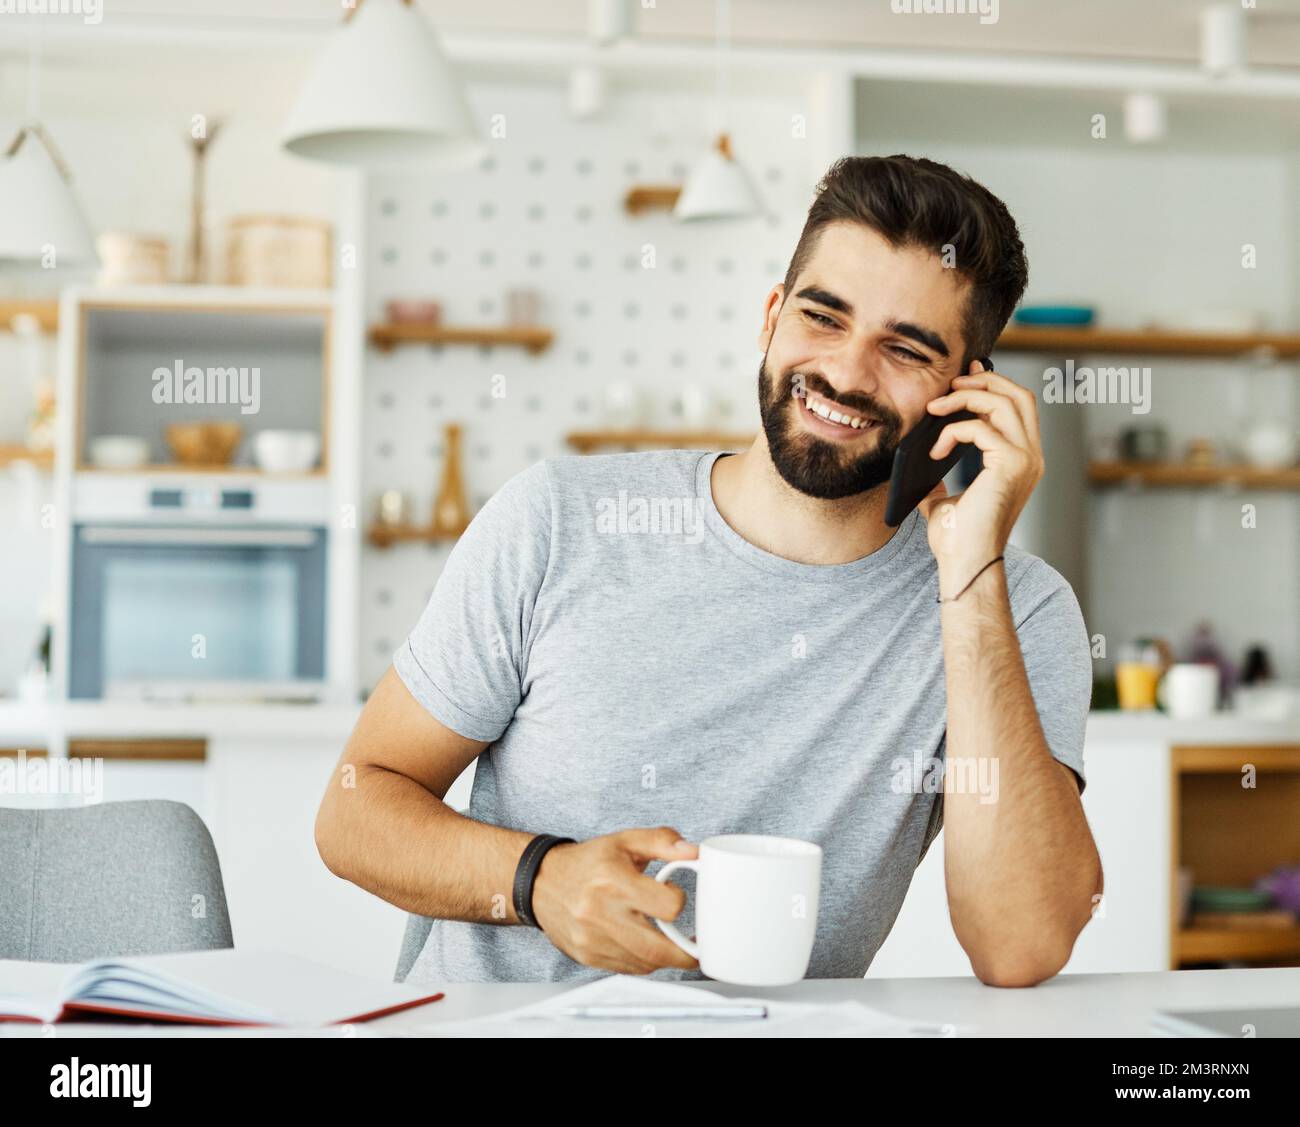 man phone home technology communication mobile smartphone call office adult young business smiling Stock Photo